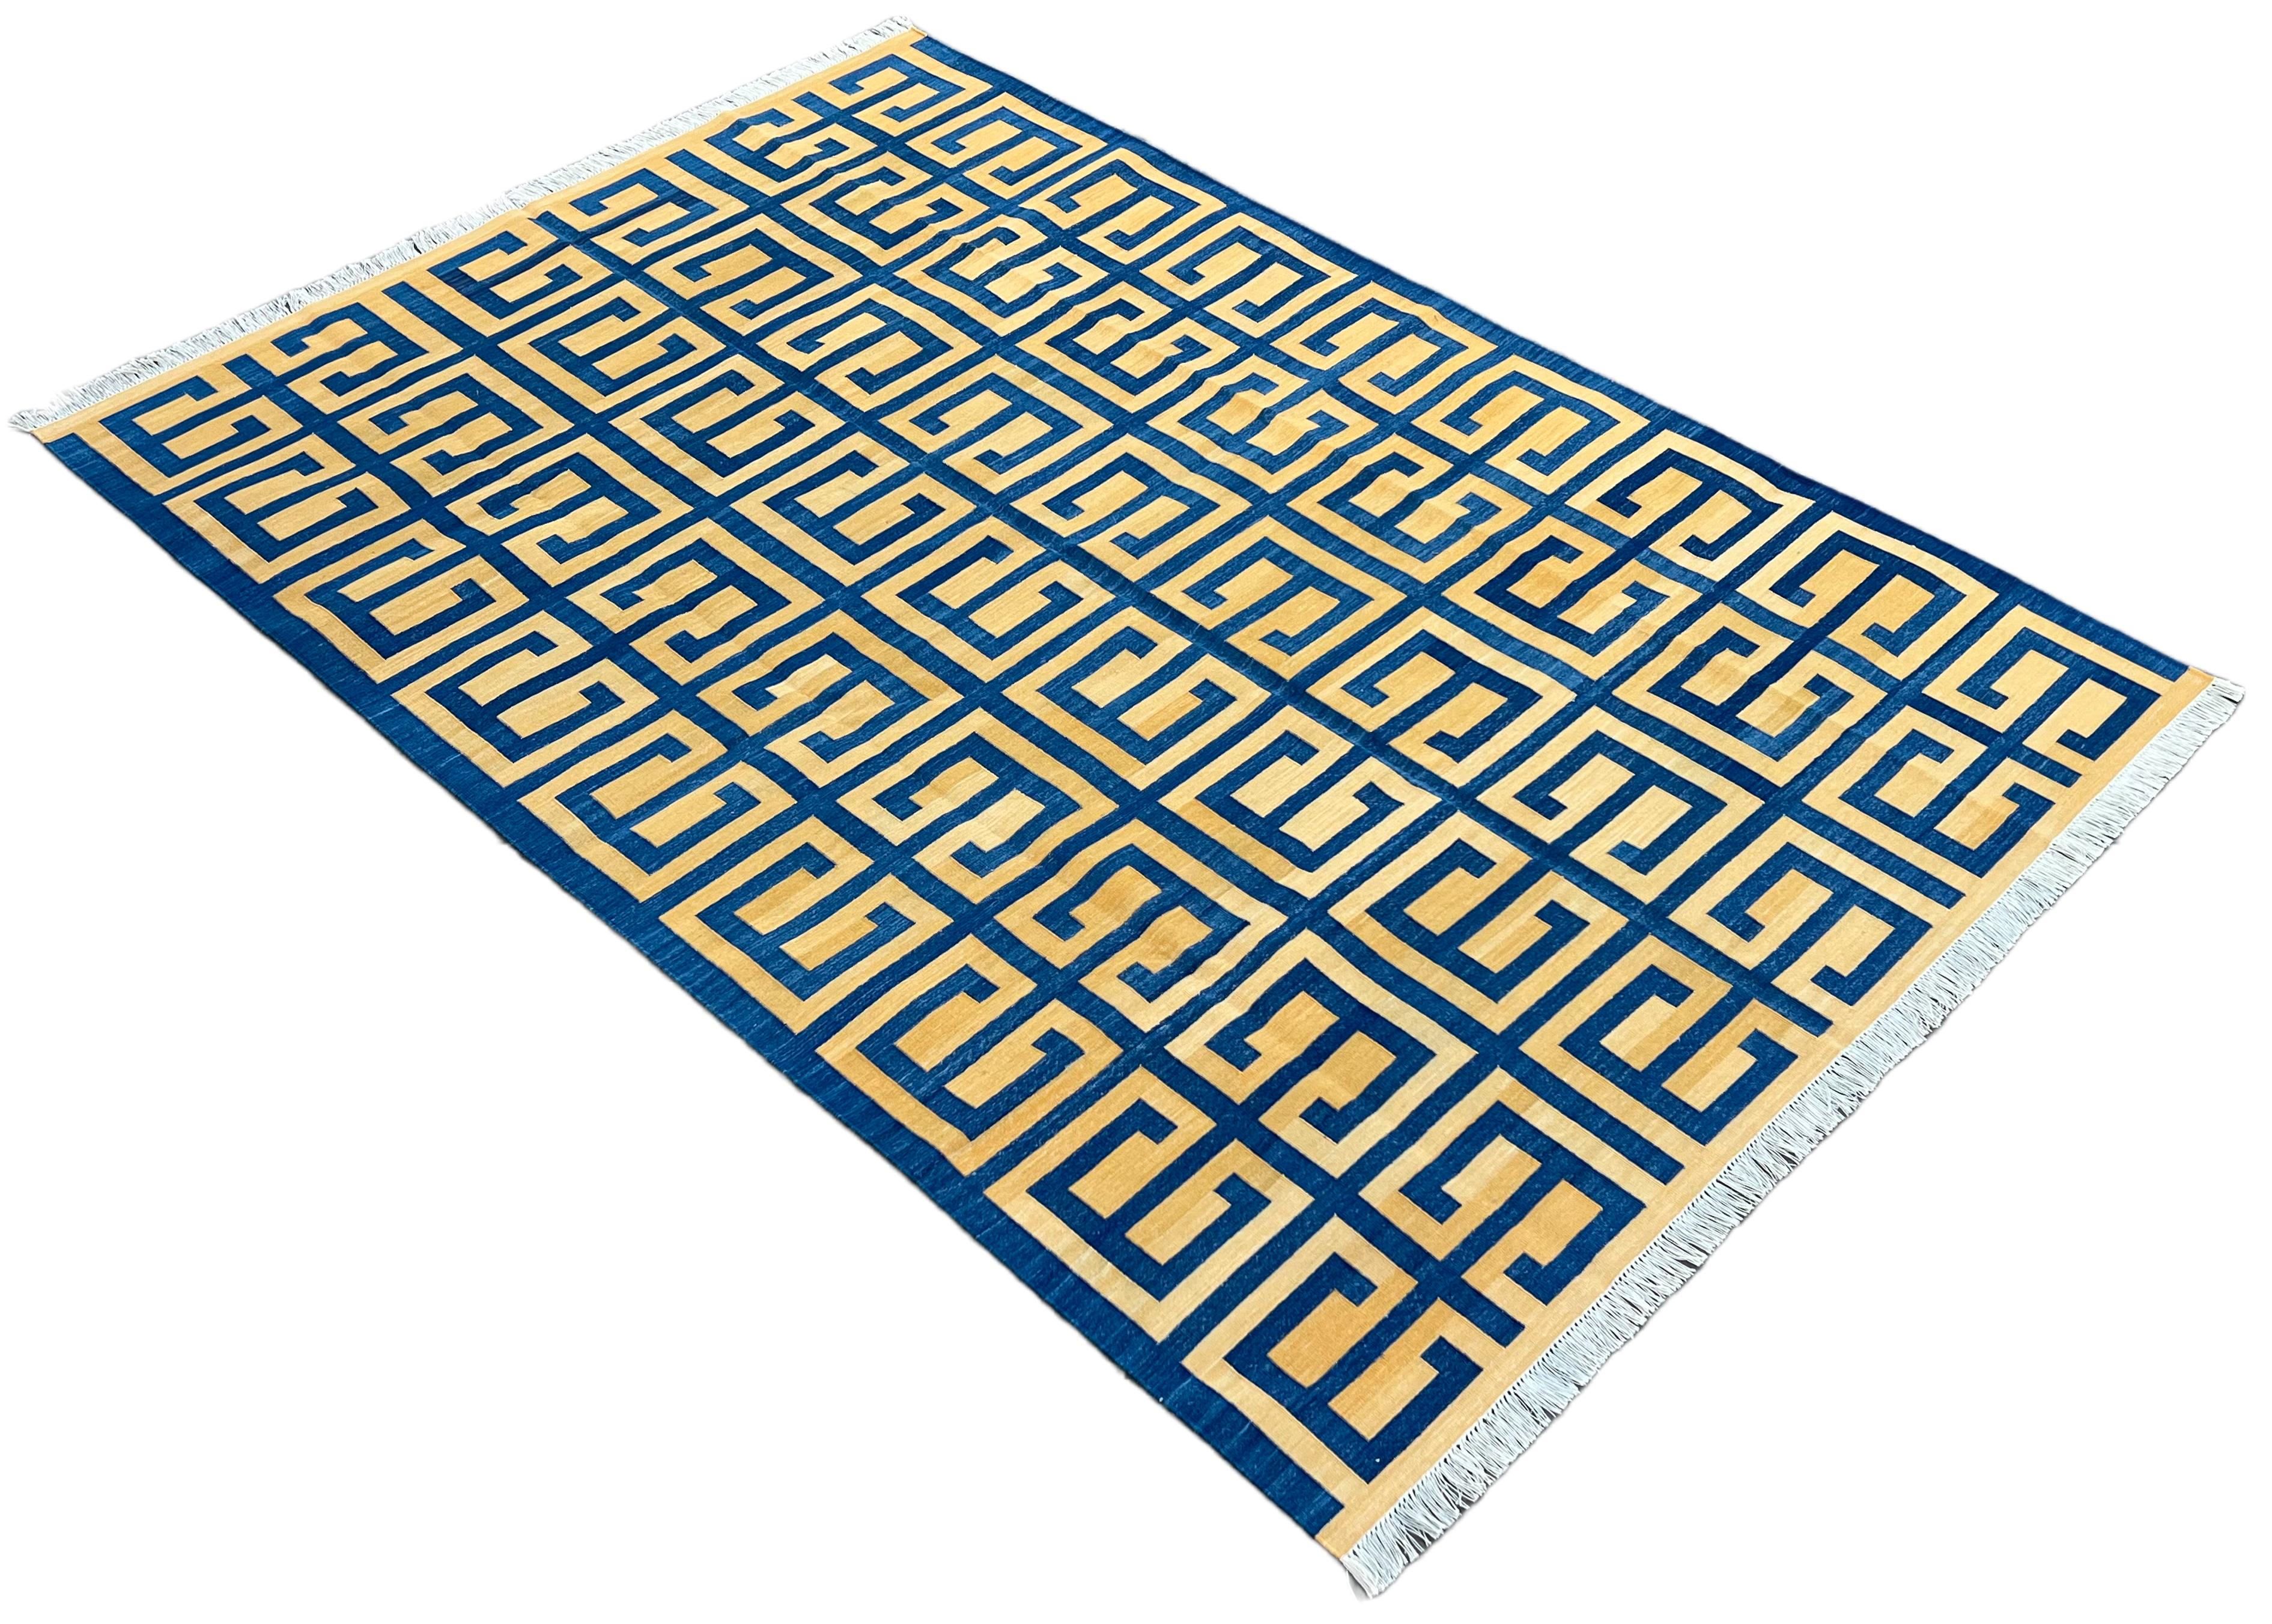 Cotton Vegetable Dyed Reversible Indigo Blue & Yellow Geometric Patterned Indian Rug - 6'x9'
These special flat-weave dhurries are hand-woven with 15 ply 100% cotton yarn. Due to the special manufacturing techniques used to create our rugs, the size